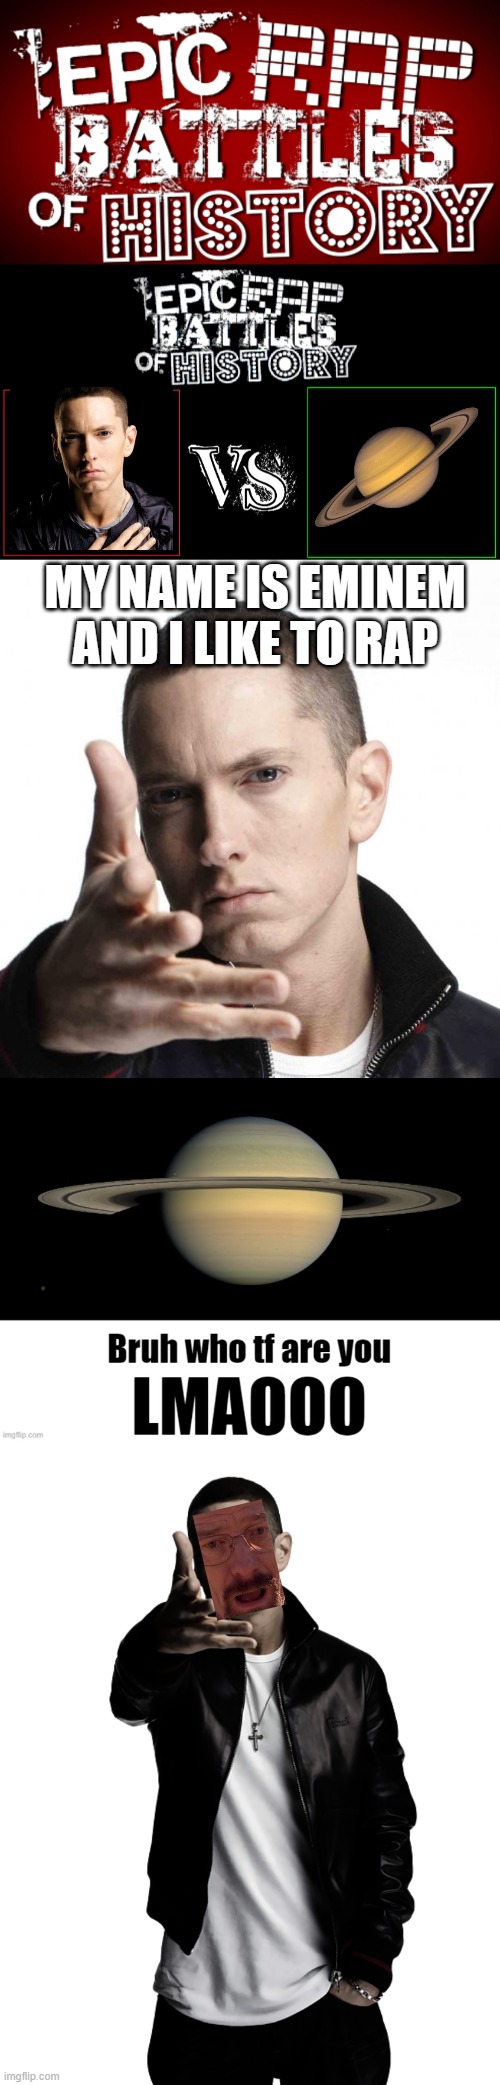 MY NAME IS EMINEM AND I LIKE TO RAP | image tagged in epic rap battles of history,eminem video game logic,bruh who tf are you lmaooo,eminem throw | made w/ Imgflip meme maker